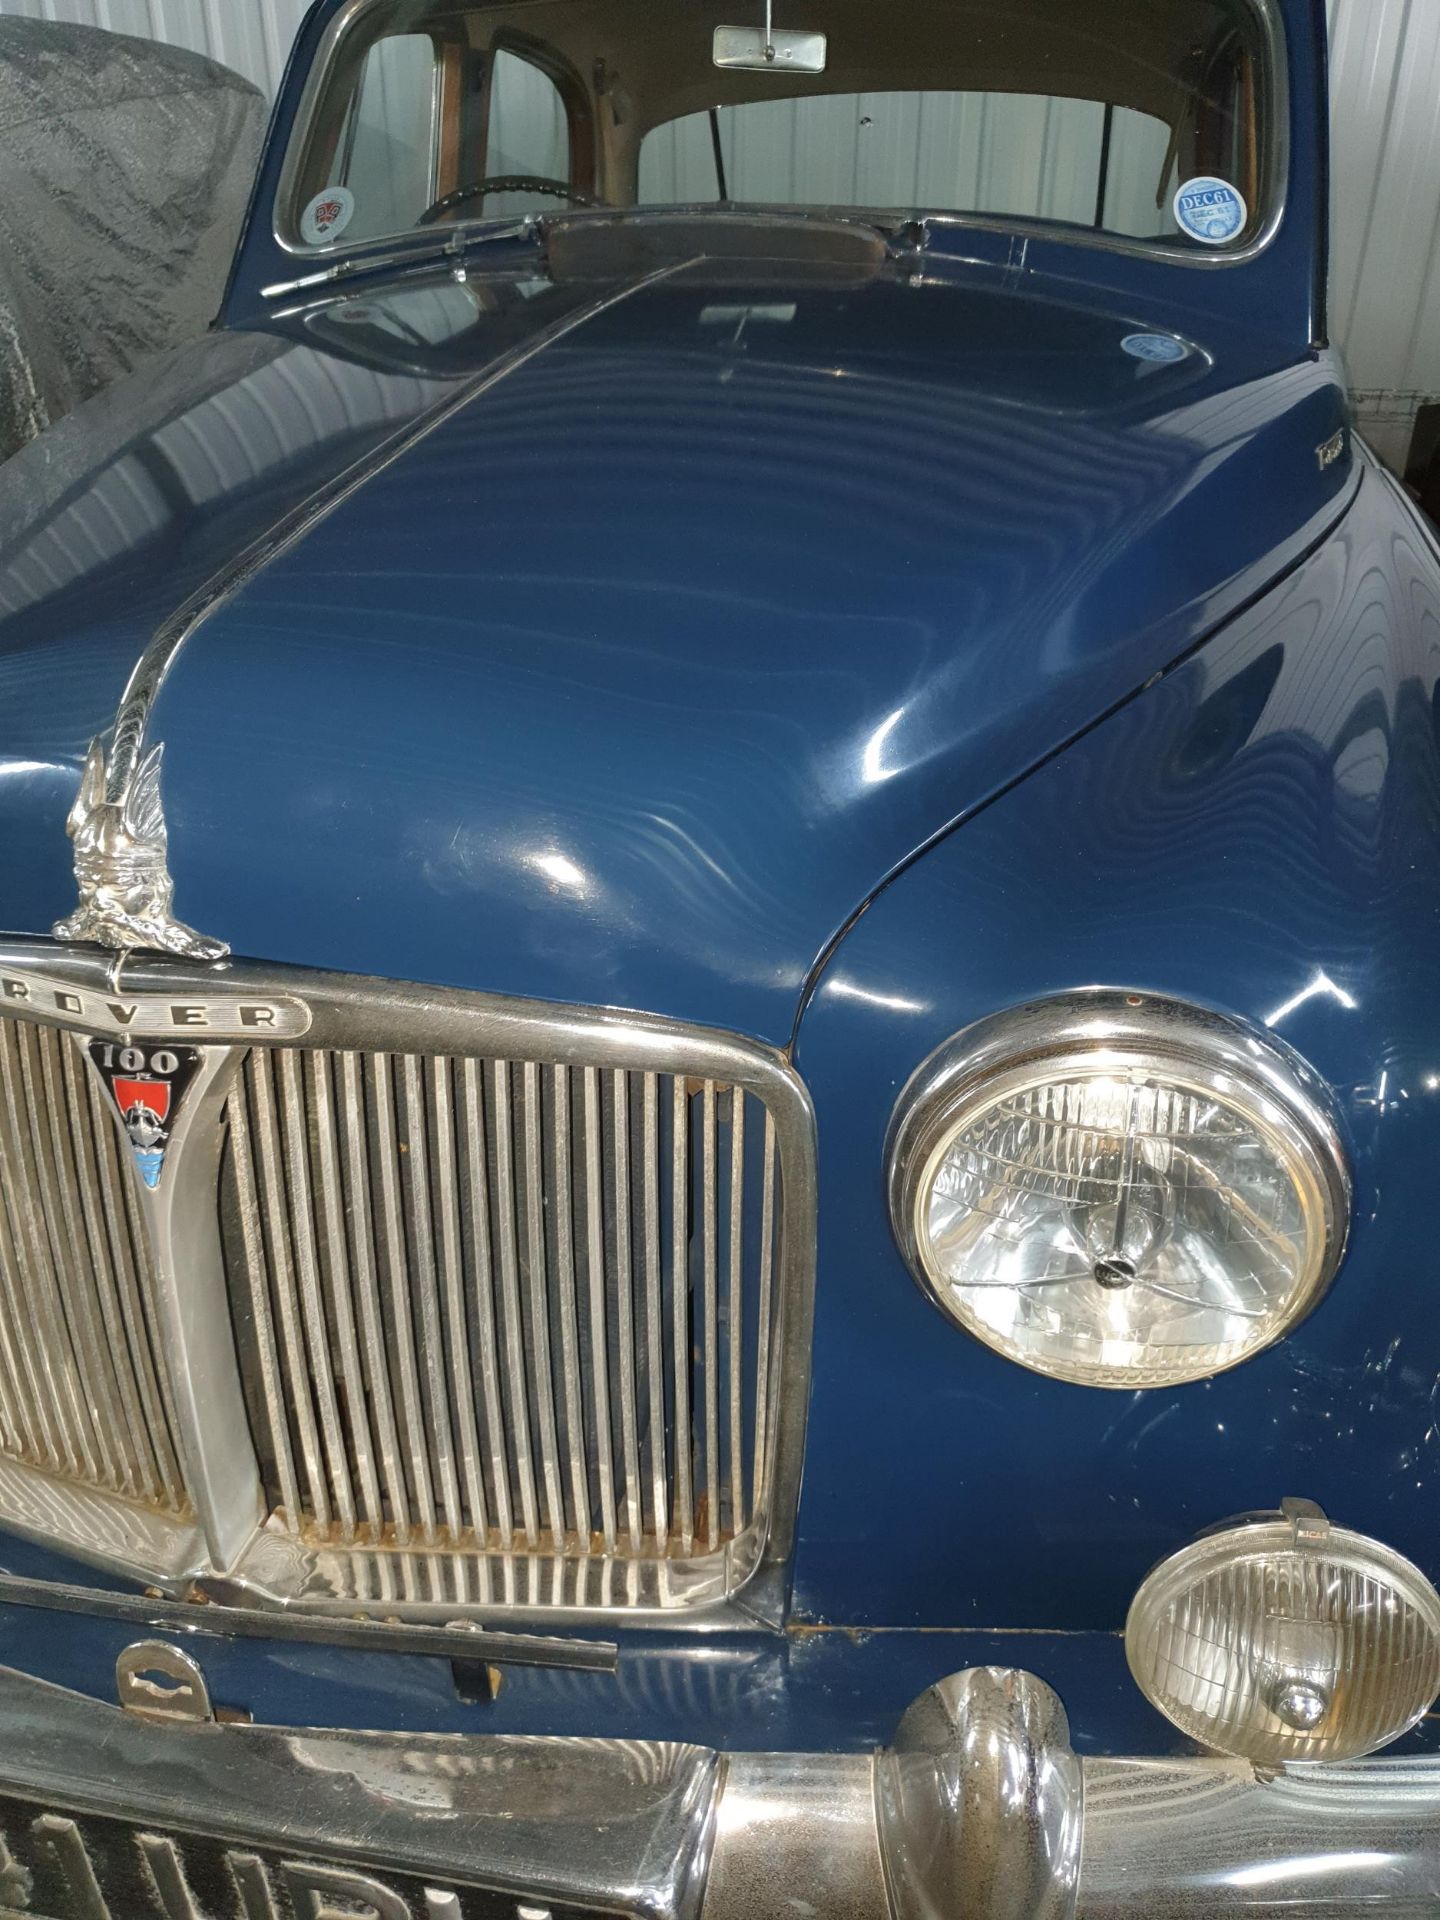 1961 Rover 100 P4 Registration number 341 UBH Blue with blue leather interior The clutch and gearbox - Image 3 of 11